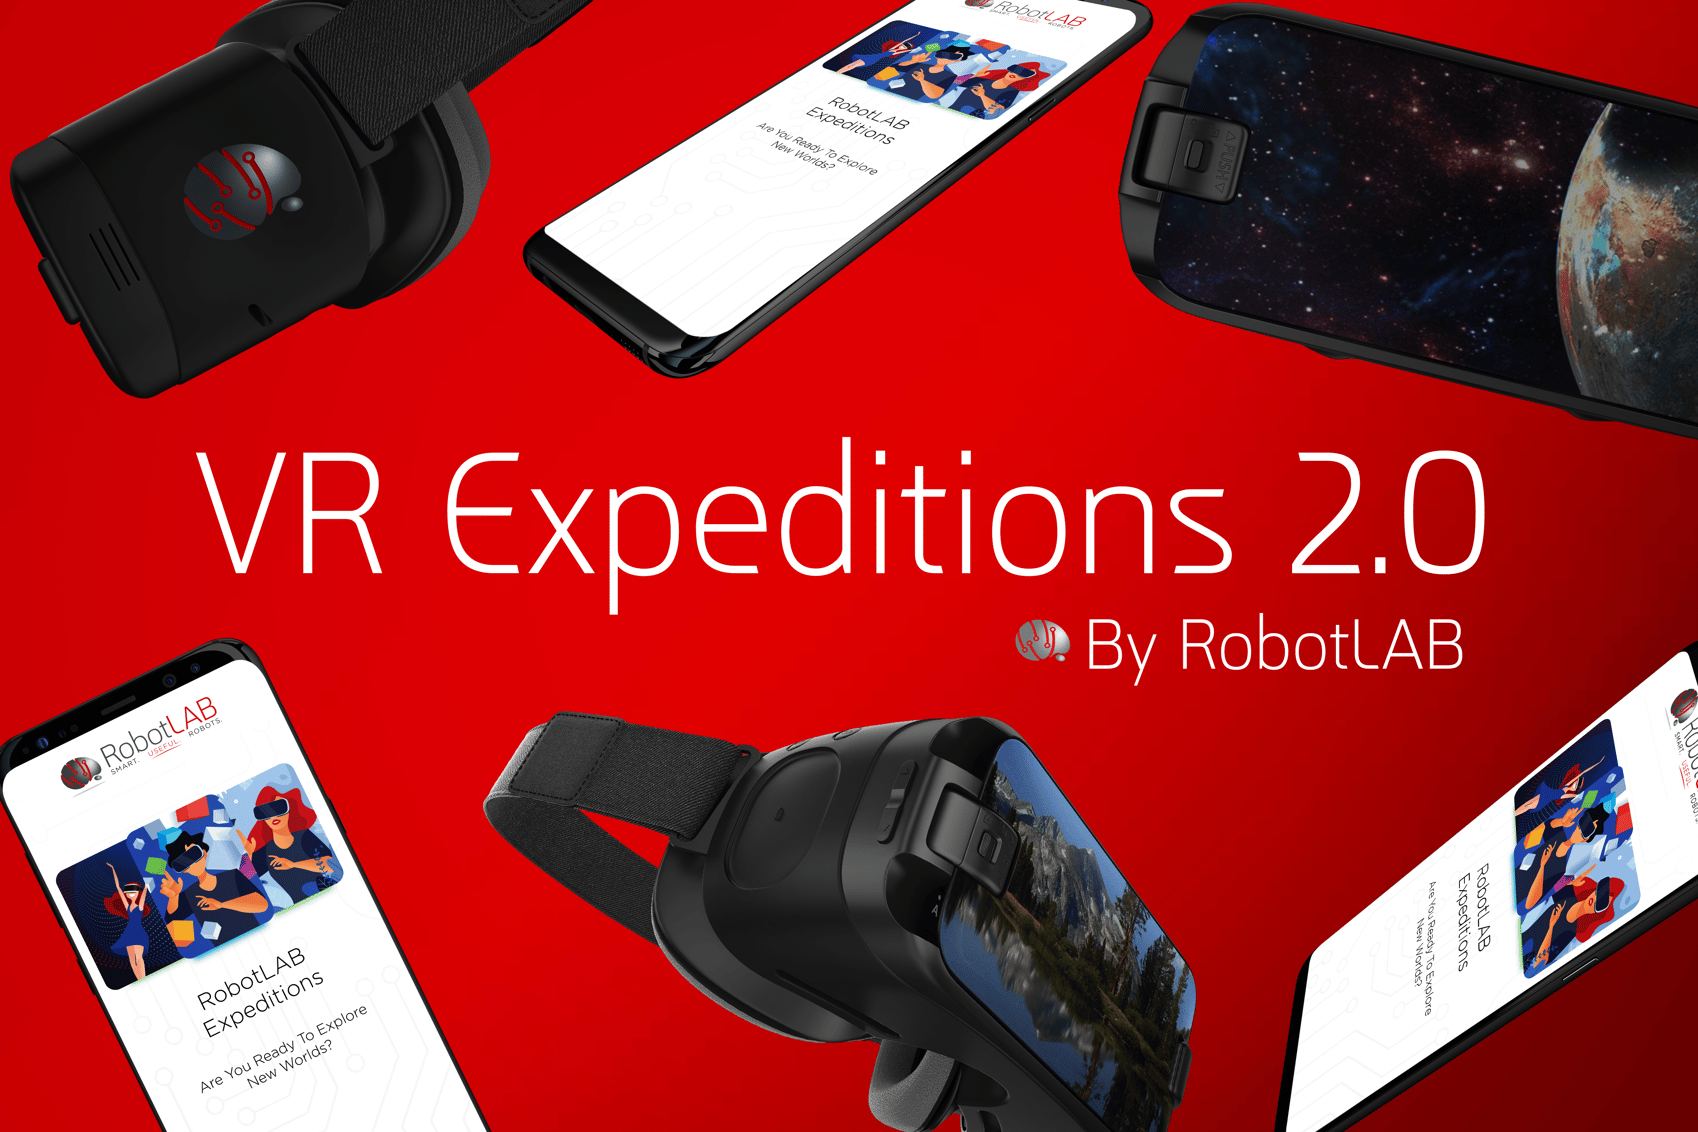 VR Expeditions 2.0 was improved, Get your free upgrade today!⏫